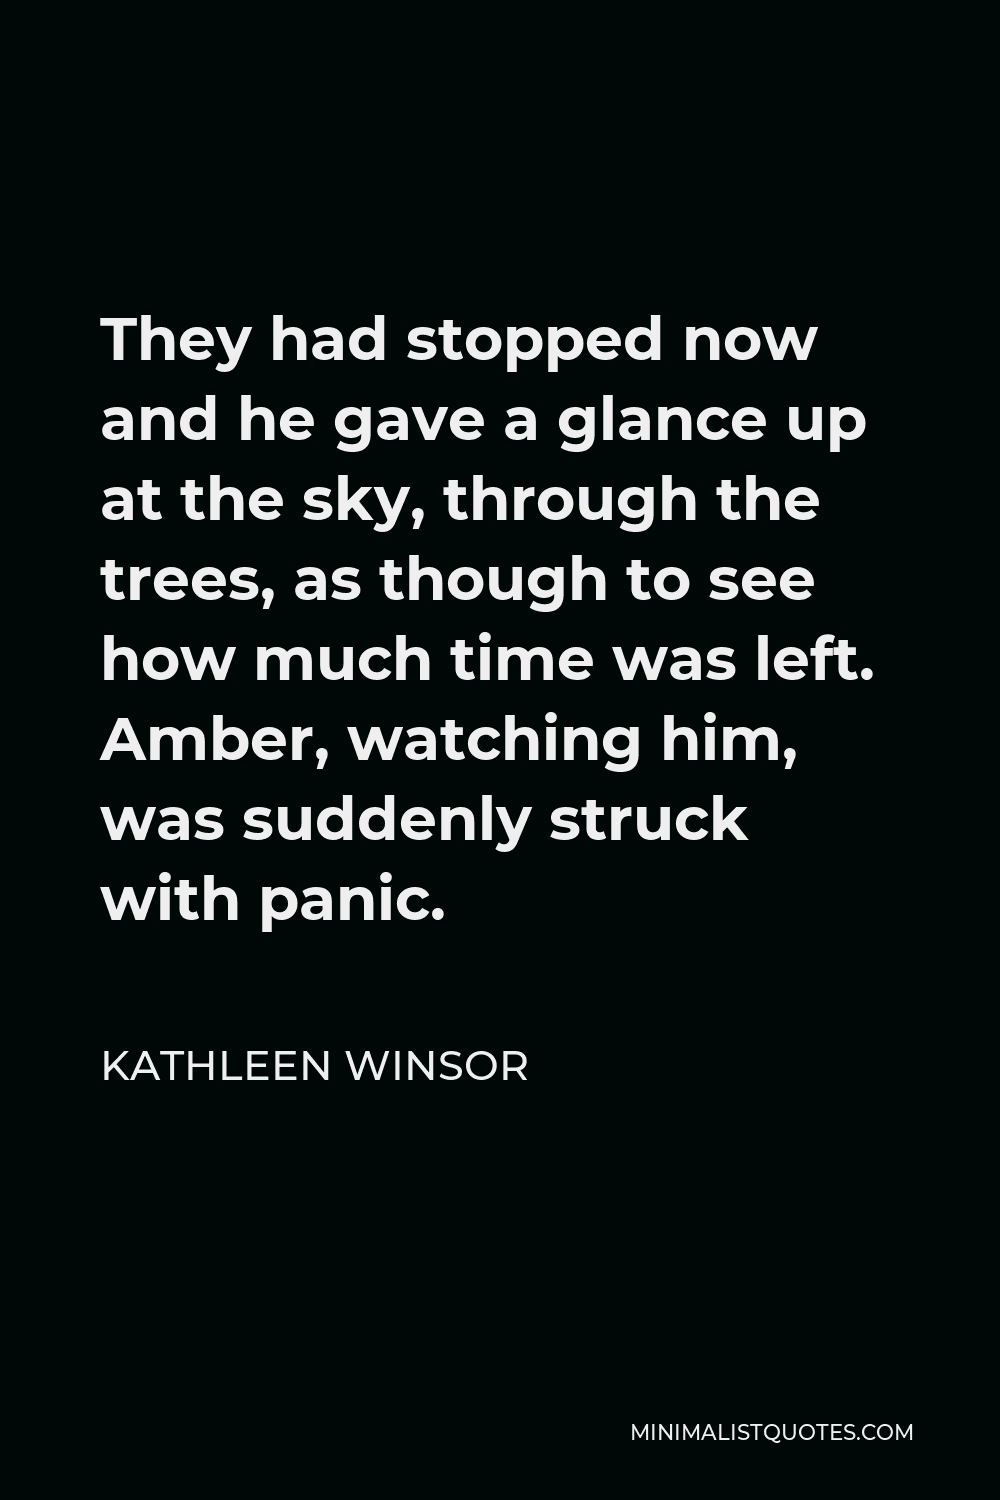 Kathleen Winsor Quote - They had stopped now and he gave a glance up at the sky, through the trees, as though to see how much time was left. Amber, watching him, was suddenly struck with panic.